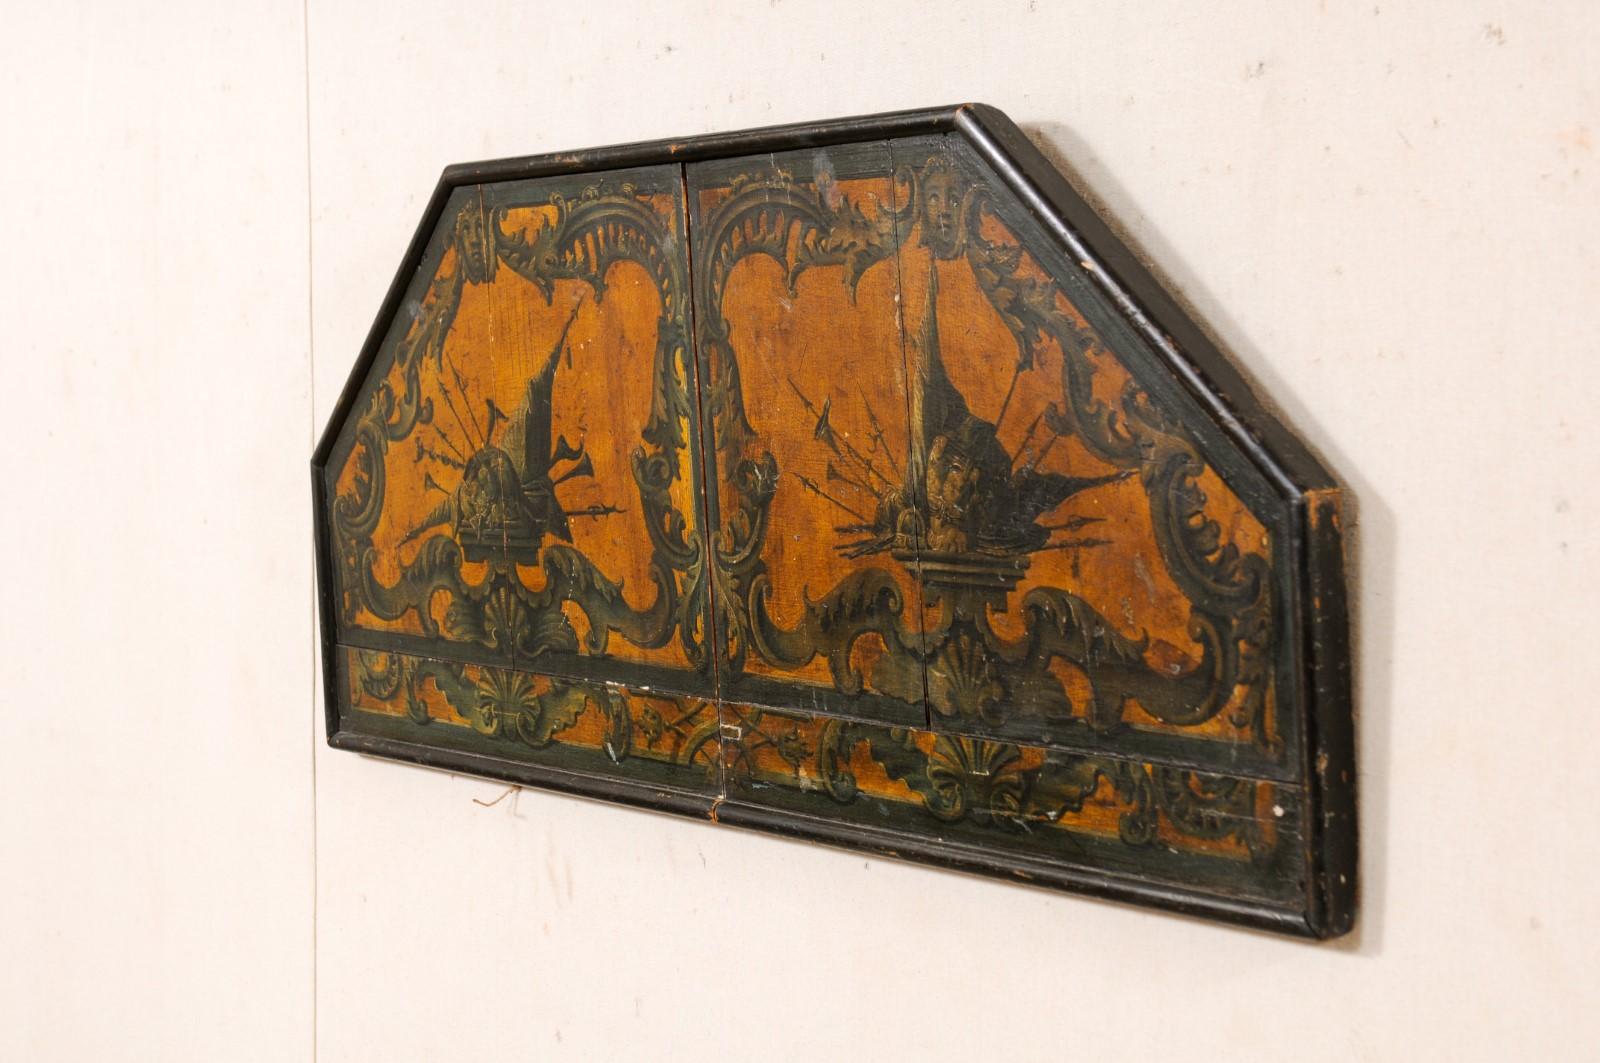 An 18th Century Italian Hand-Painted Plaque, Decorative Wall Ornament For Sale 1